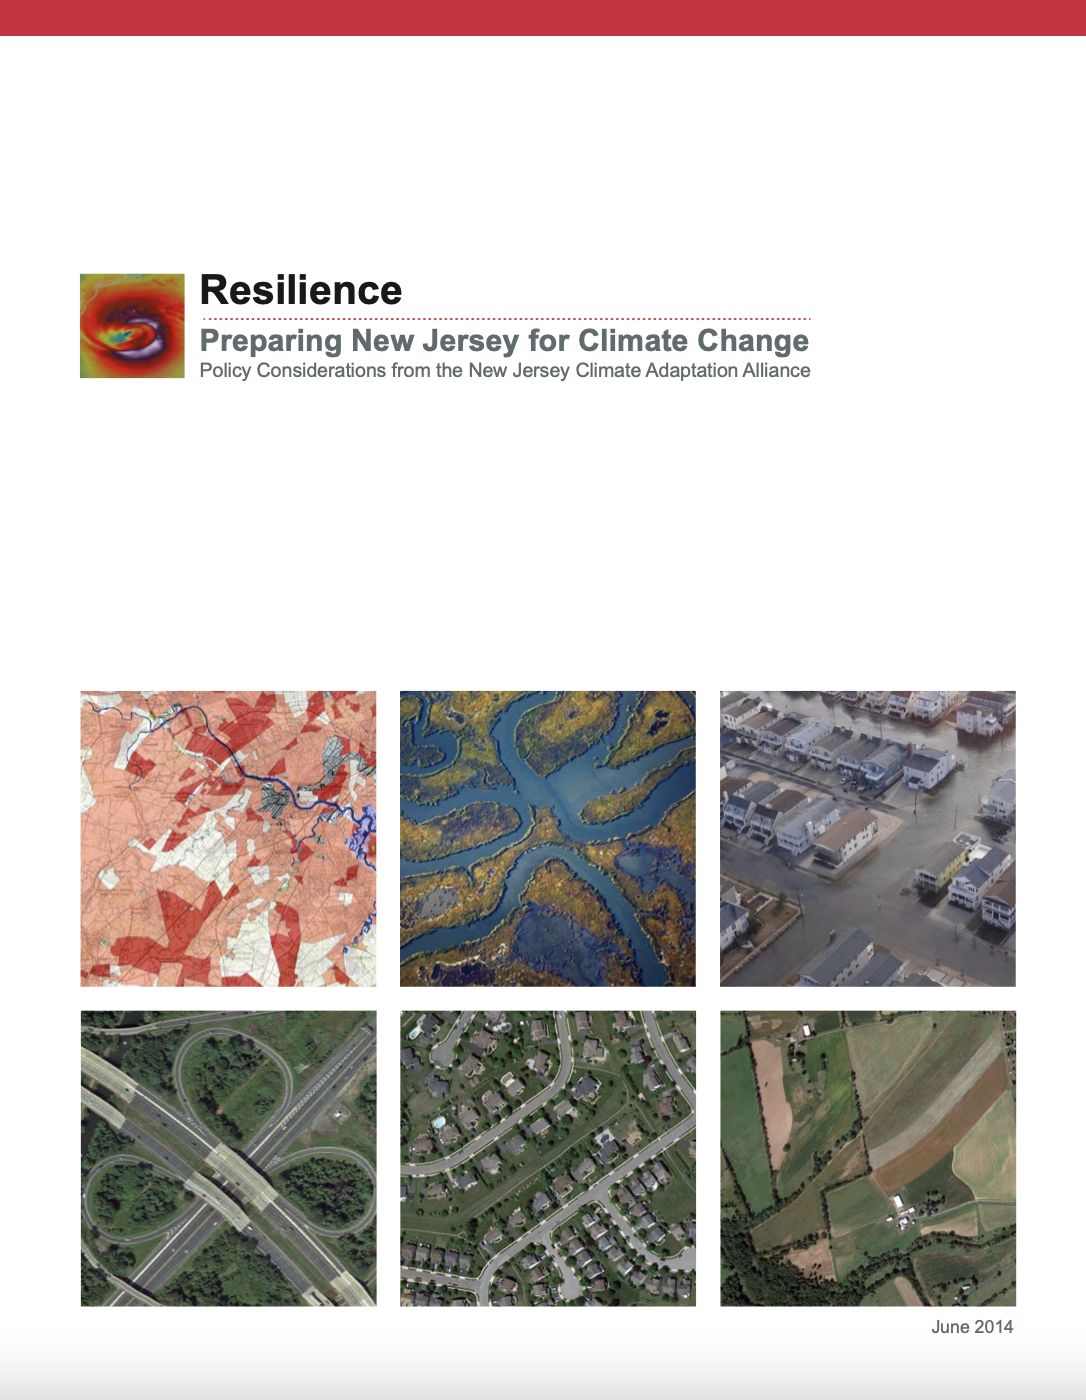 Resilience. Preparing New Jersey for Climate Change